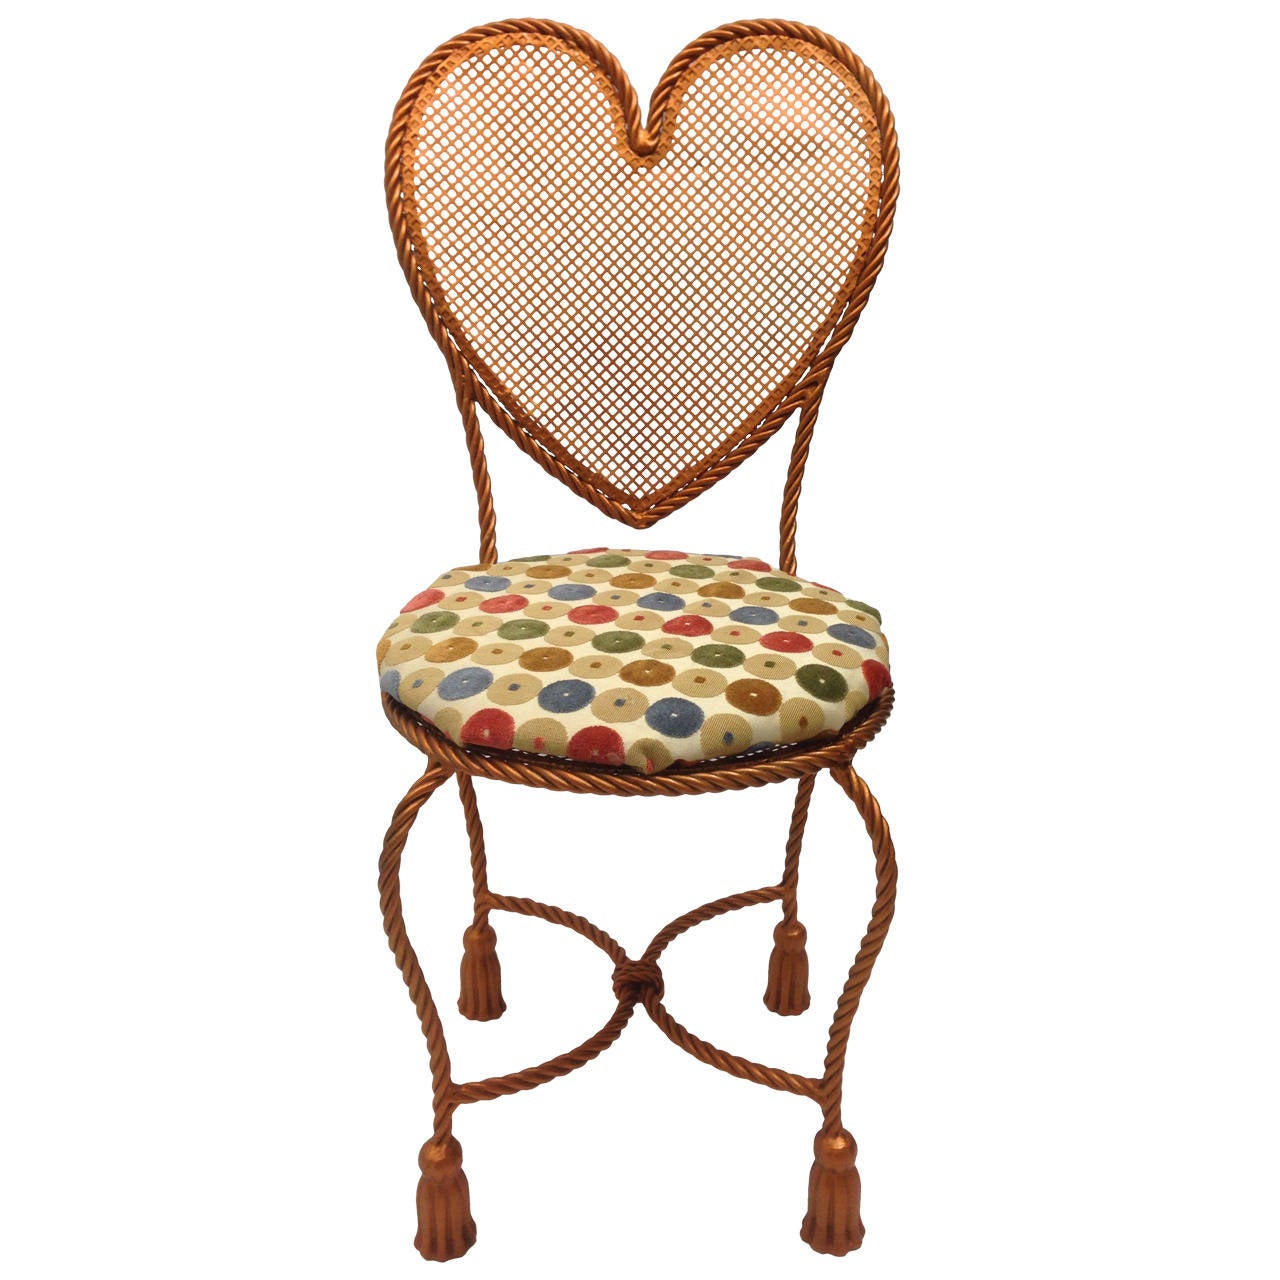 Heart Shaped Rope Chair at 1stdibs